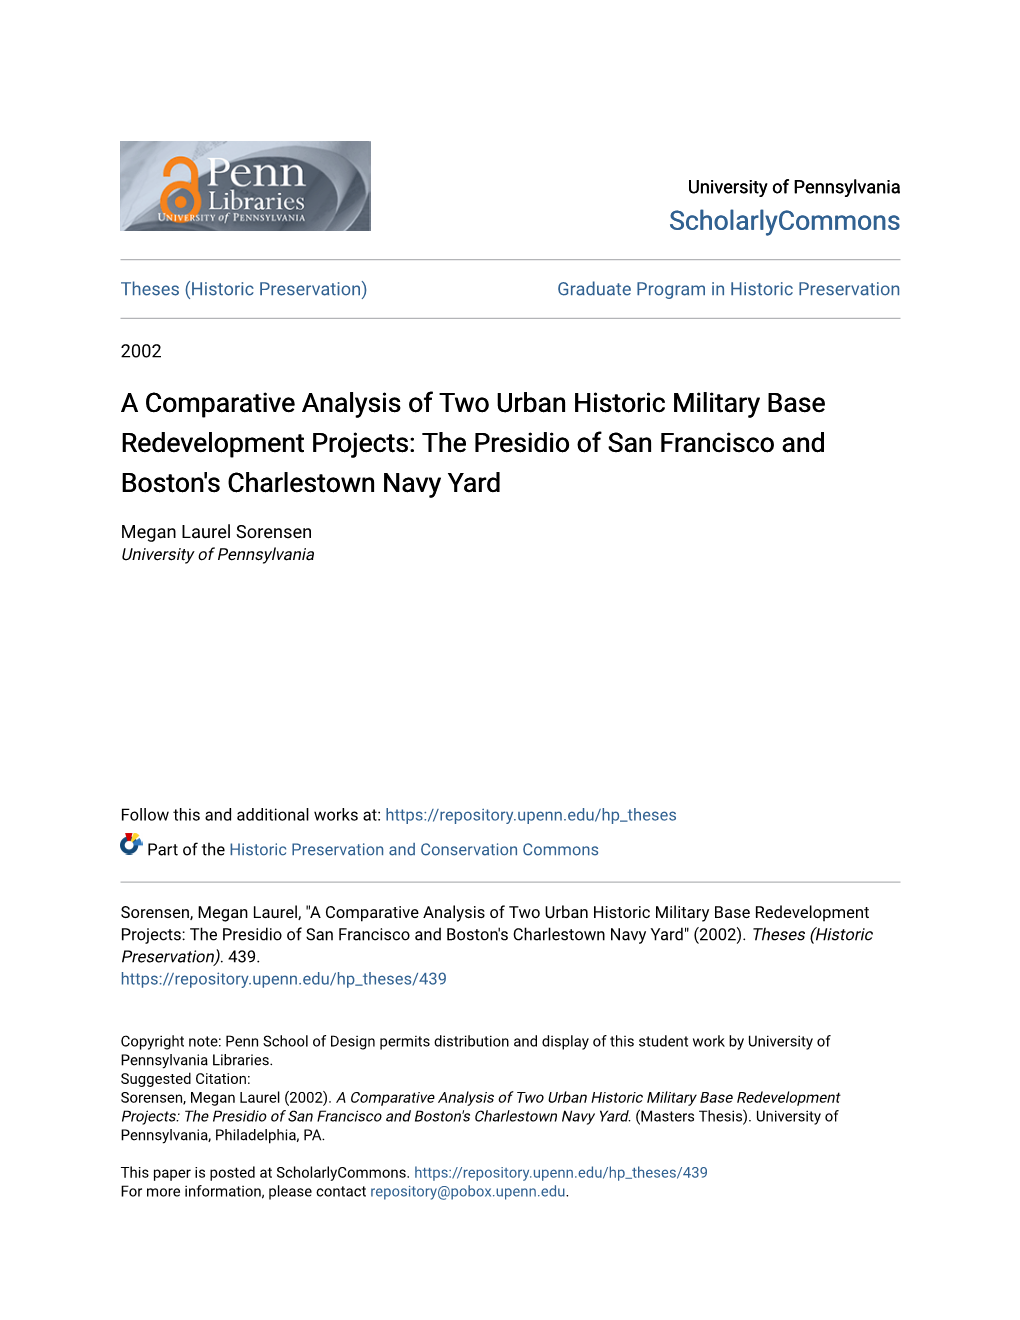 A Comparative Analysis of Two Urban Historic Military Base Redevelopment Projects: the Presidio of San Francisco and Boston's Charlestown Navy Yard